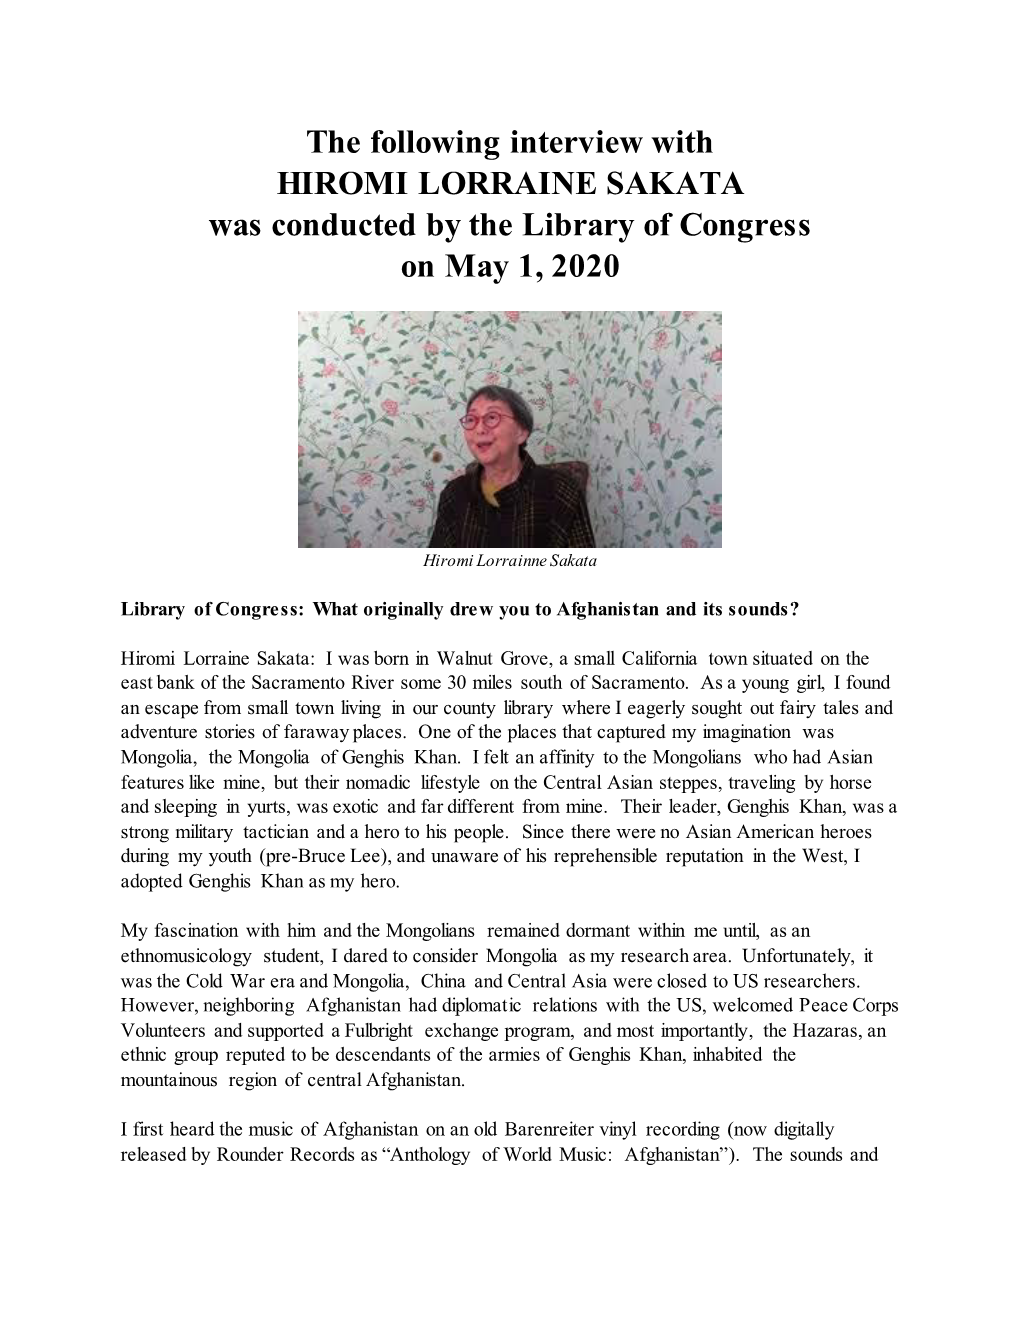 Interview with HIROMI LORRAINE SAKATA Was Conducted by the Library of Congress on May 1, 2020